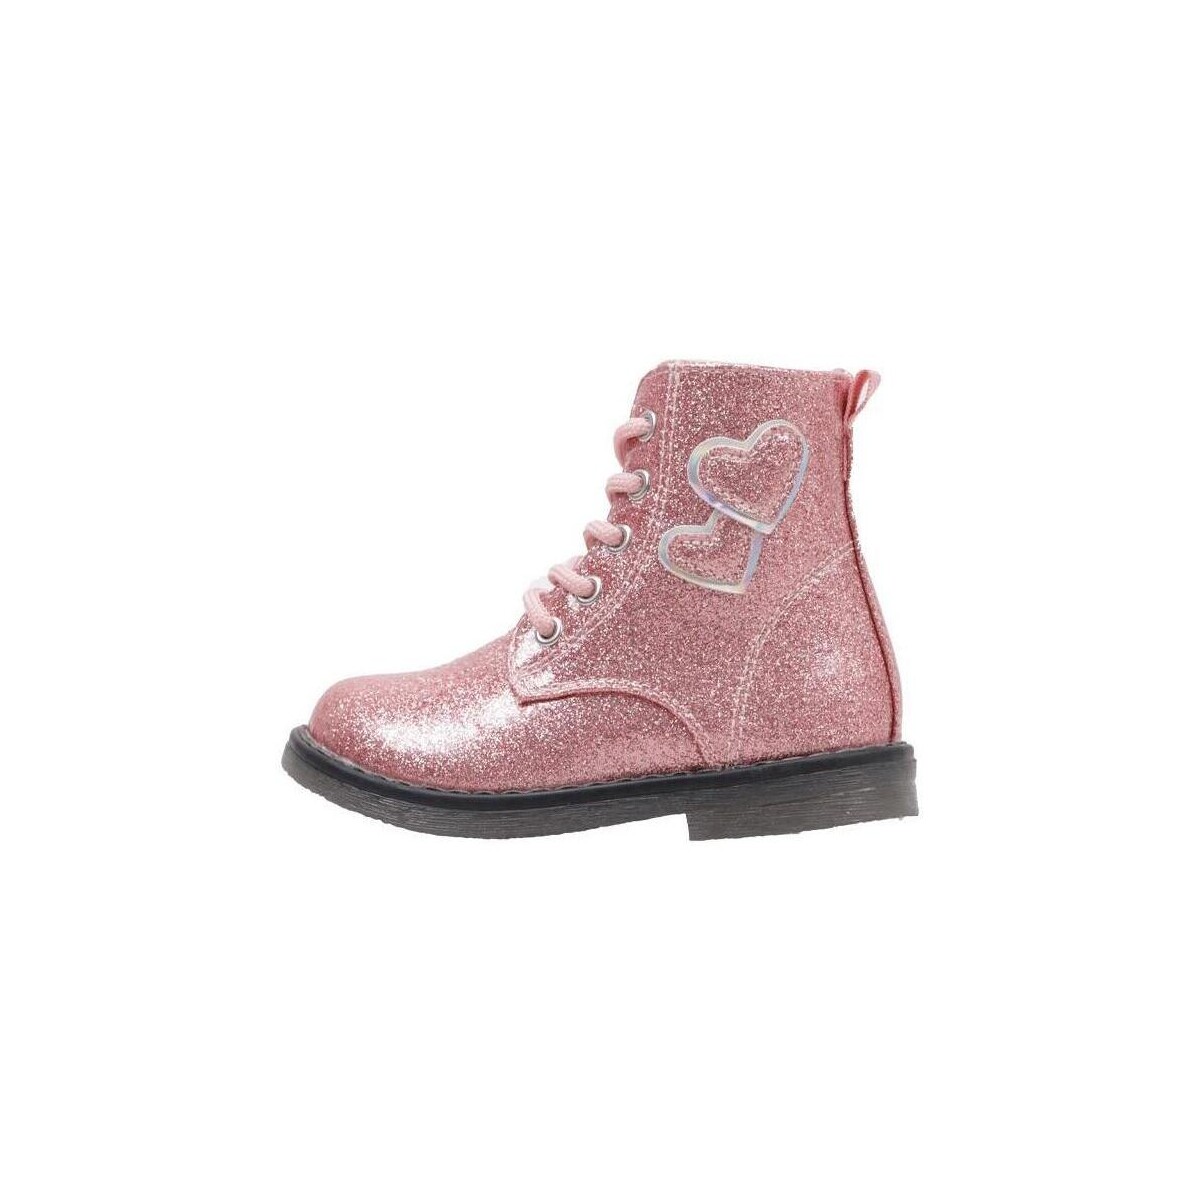 Chaussures Fille Bottes Osito OSSH 131 019 Rose